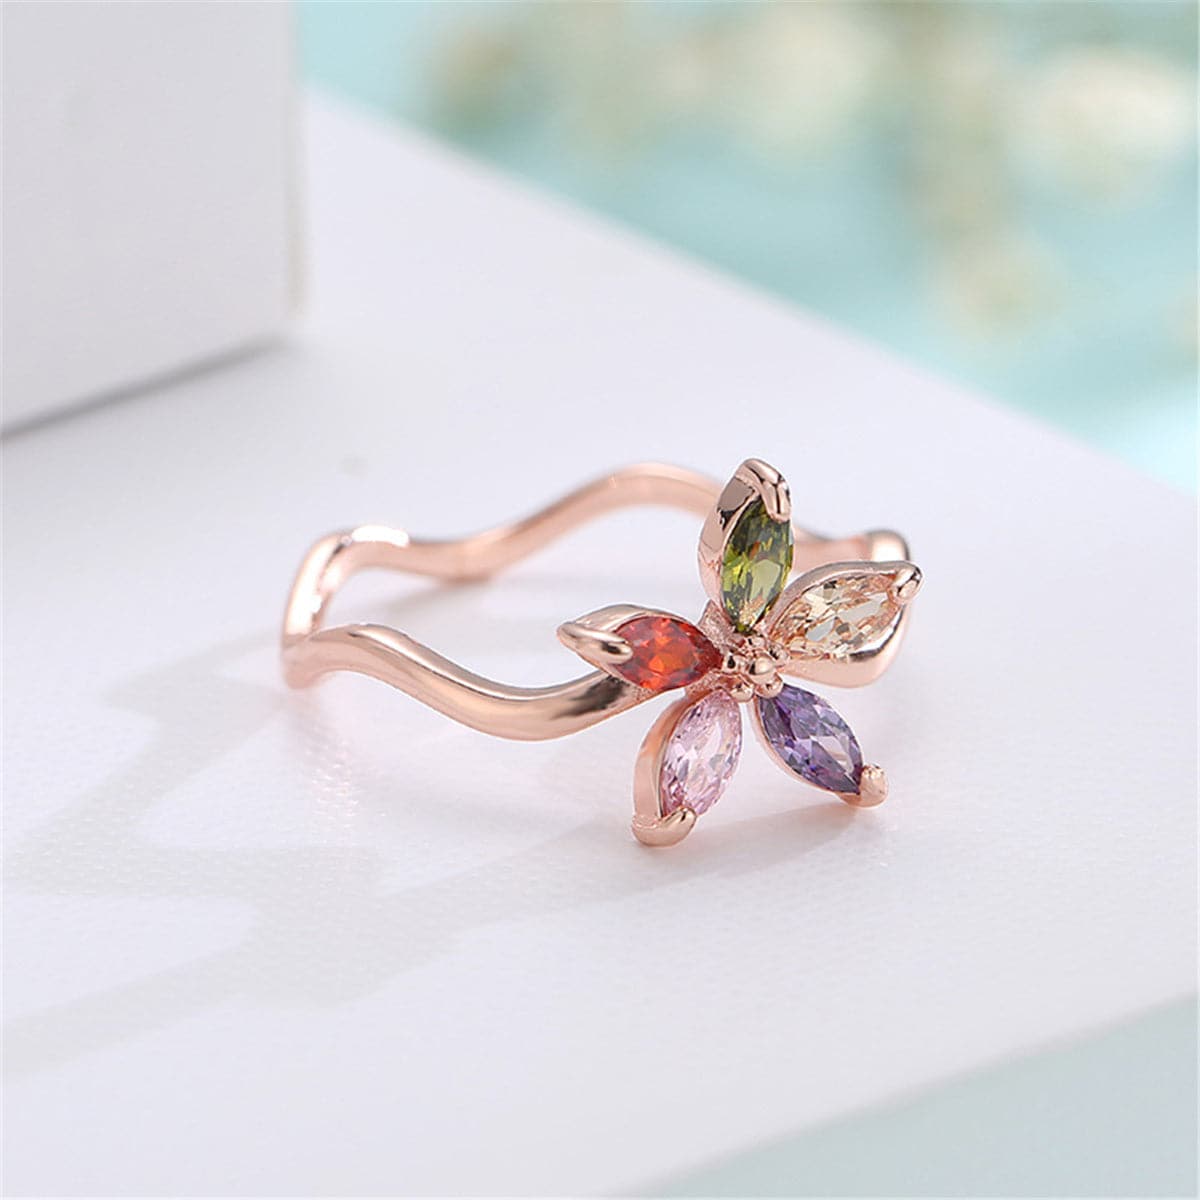 Jewel-Tone Crystal & 18k Rose Gold-Plated Floral Weave Ring - streetregion